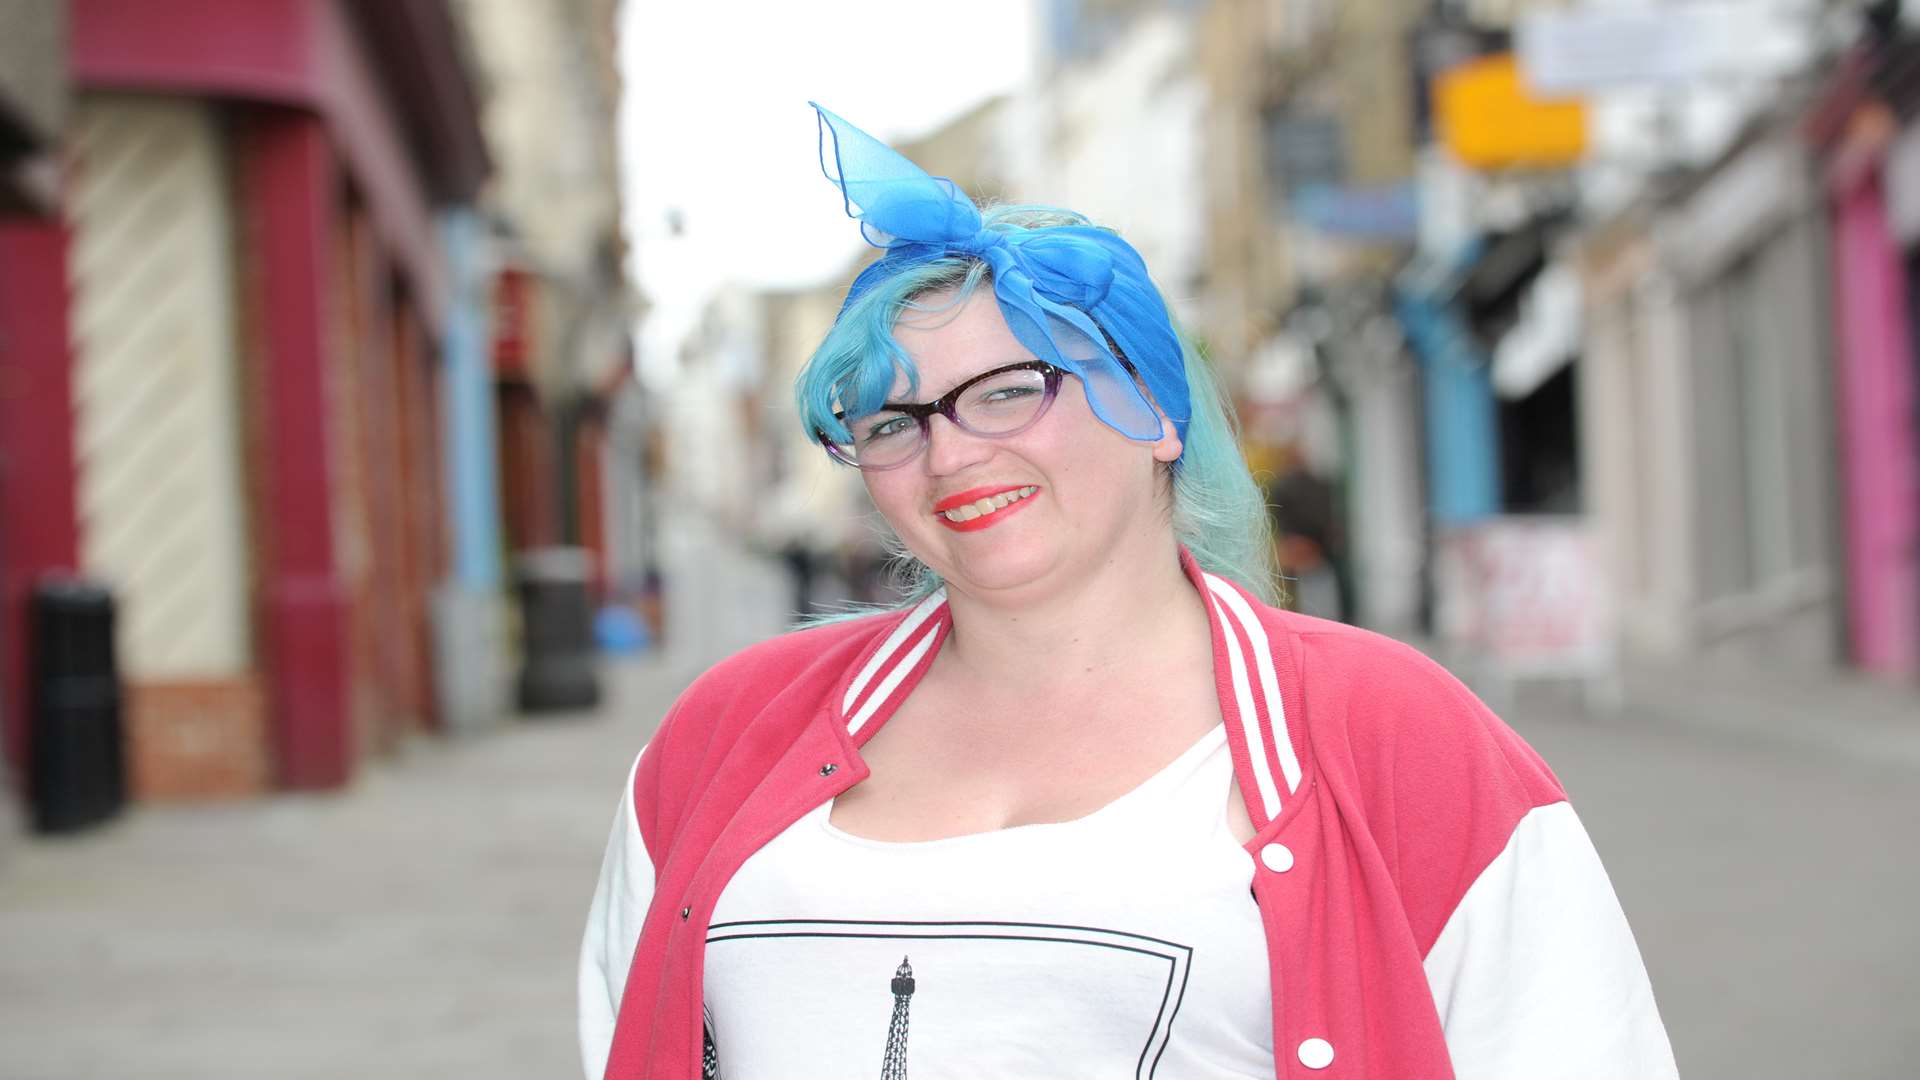 Abigail Gibson Of Swanscombe Hoping To Be Crowned Miss Pinup Uk 2015